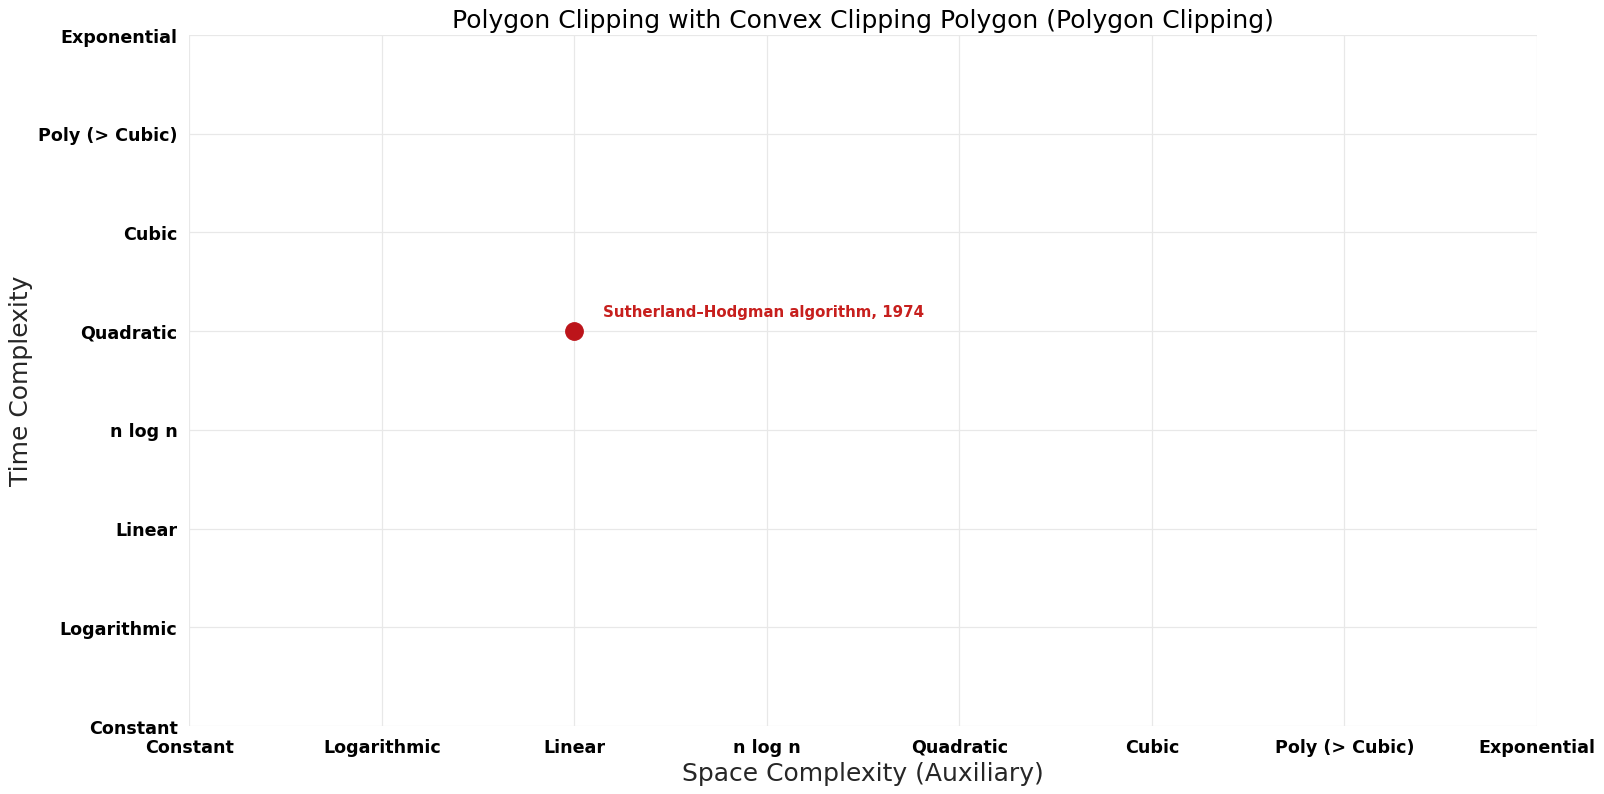 Polygon Clipping - Polygon Clipping with Convex Clipping Polygon - Pareto Frontier.png